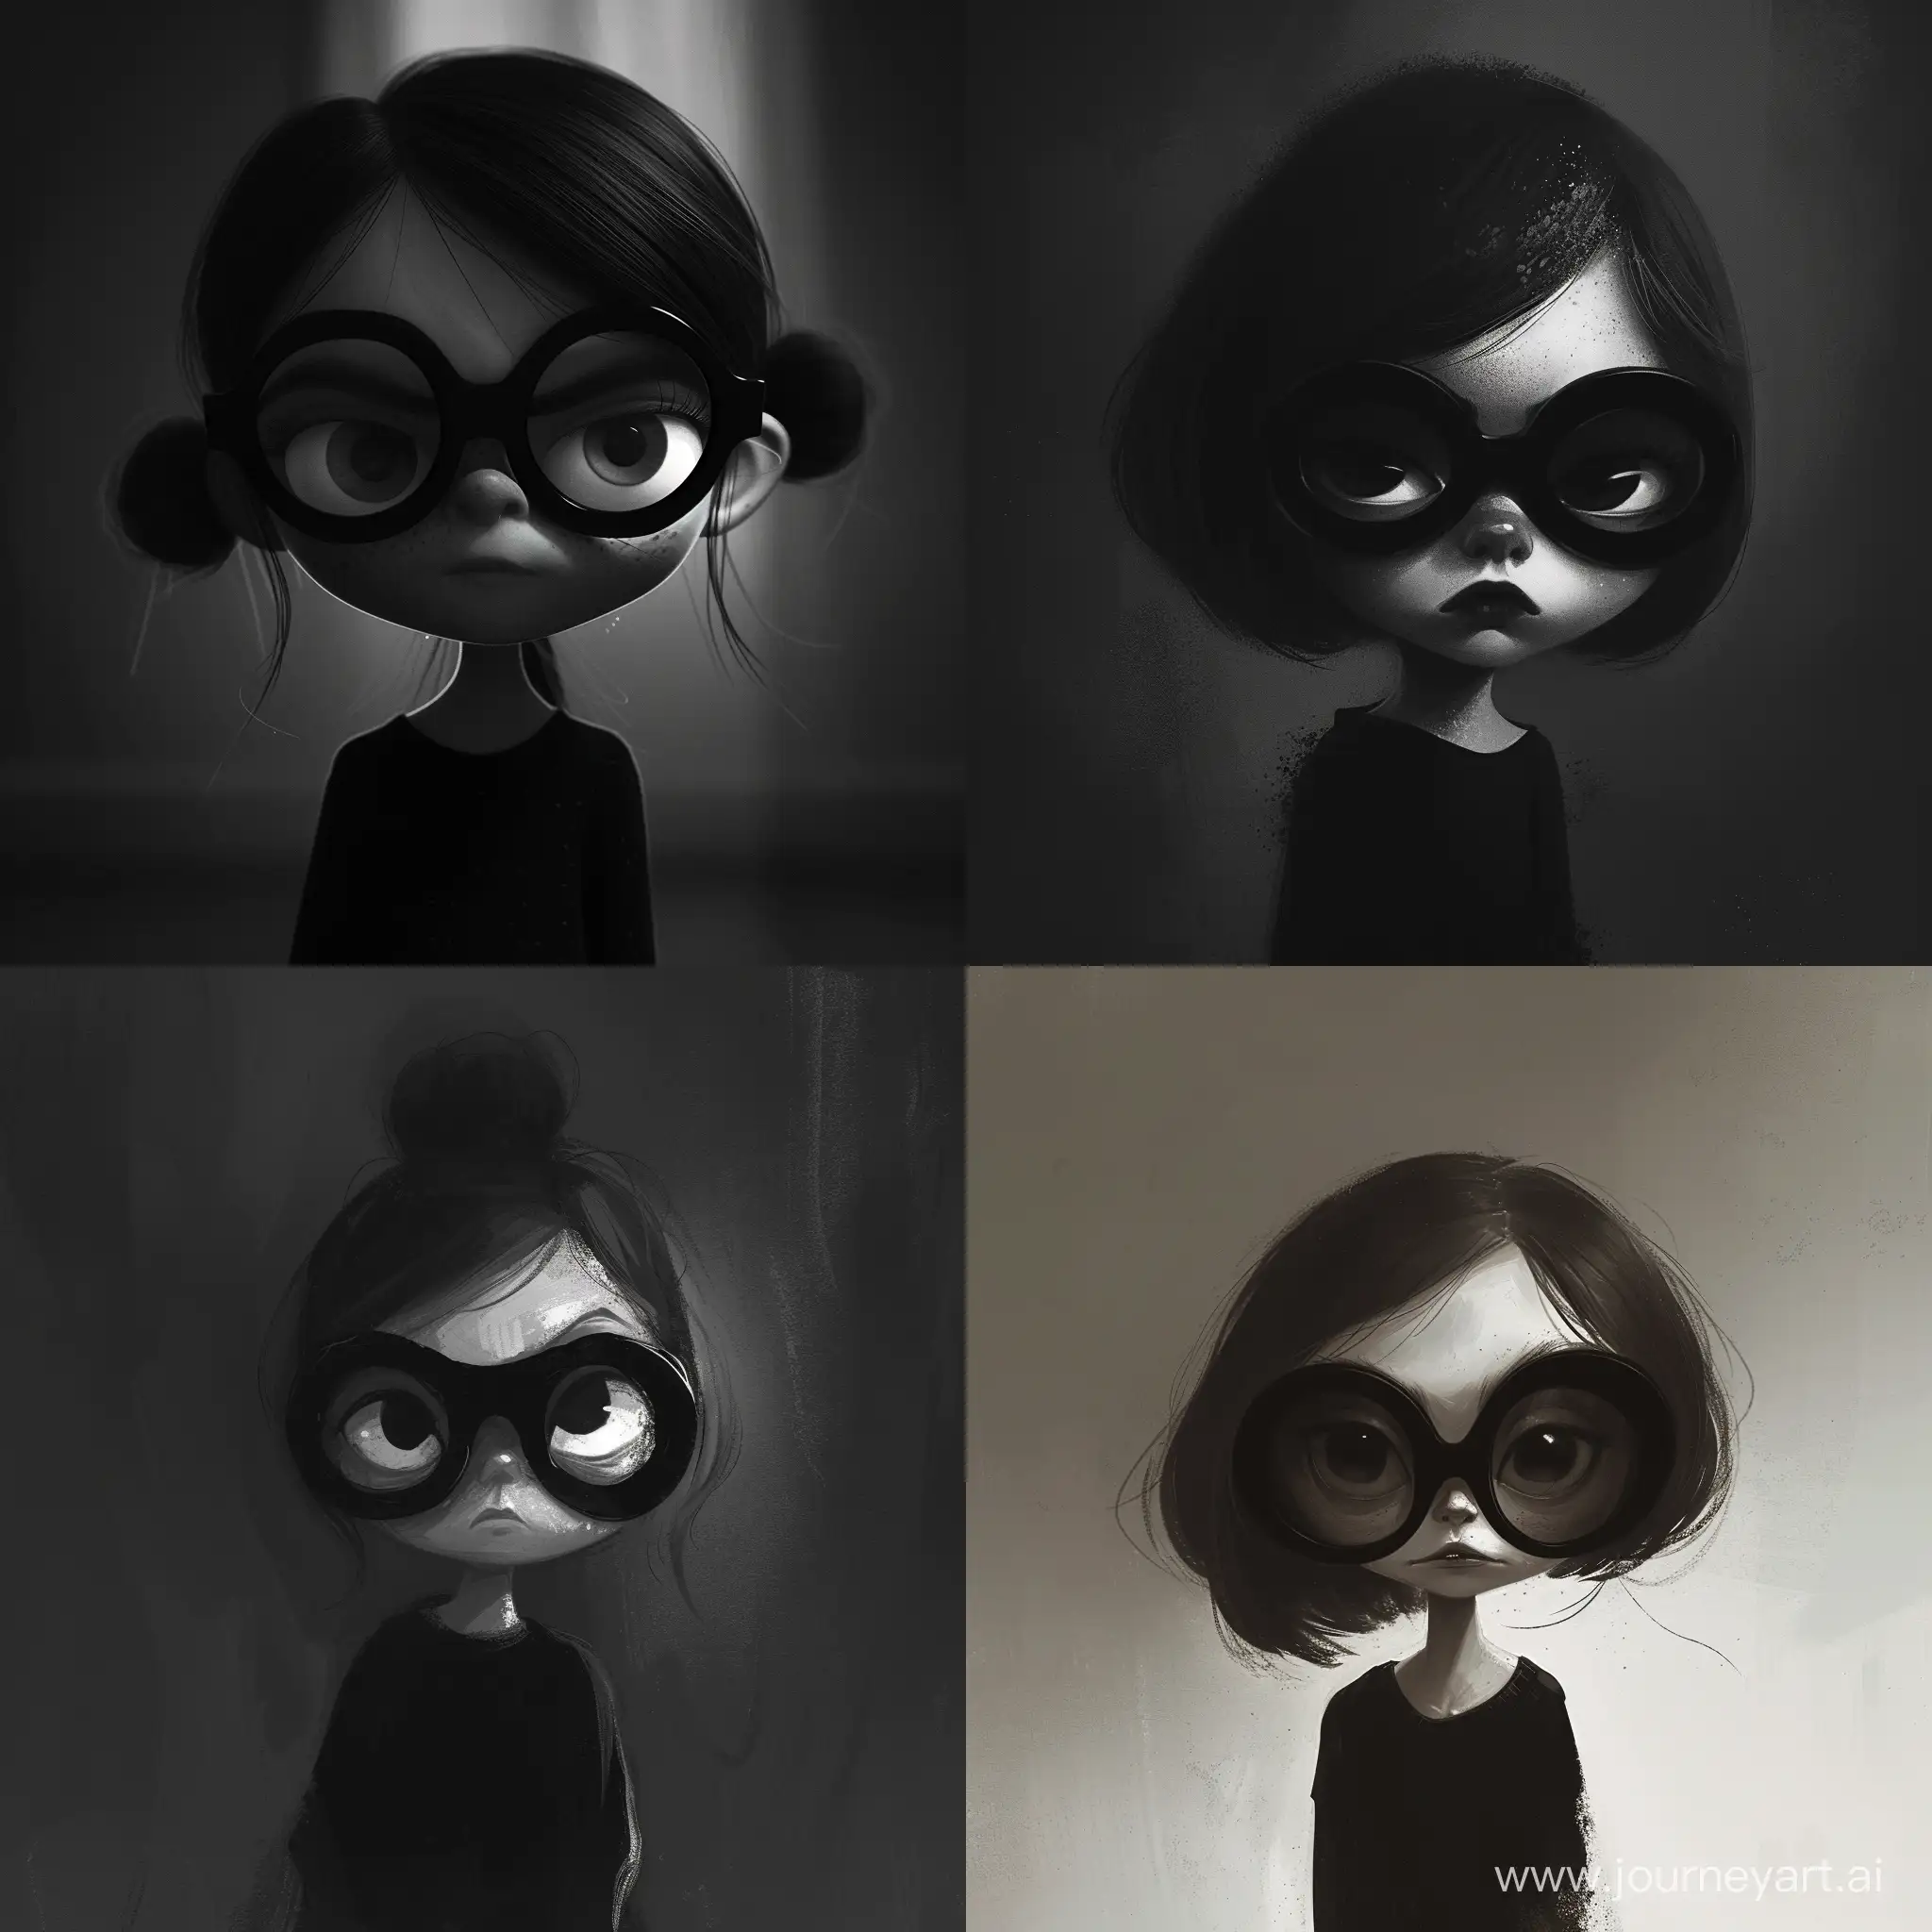 The girl is small and favors wearing dark colors, particularly black, in order to blend into the shadows. Her black glasses give off a foreboding impression, as they appear larger than her face. Though her appearance may come across as frail and vulnerable, there is a dark, brooding intensity hidden in her intense stare.